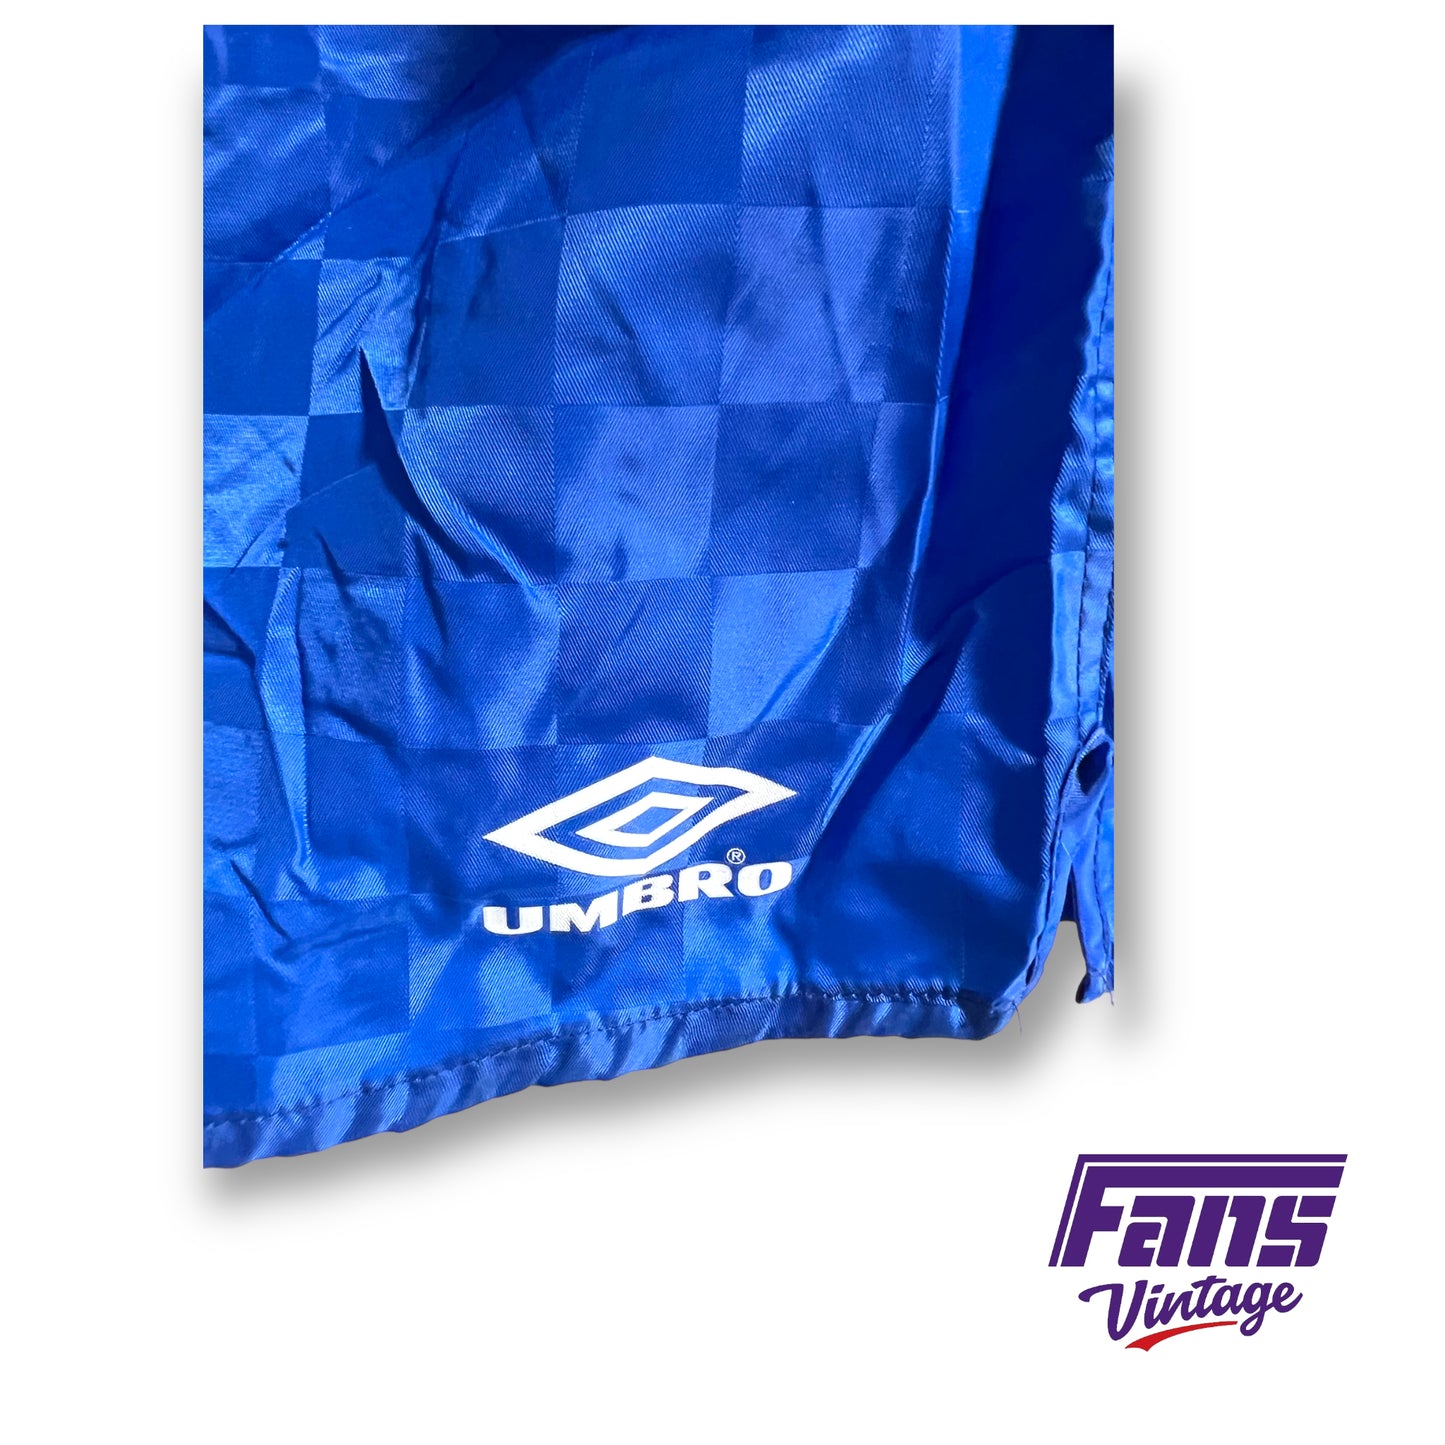 Vintage Umbro soccer shorts - Classic look